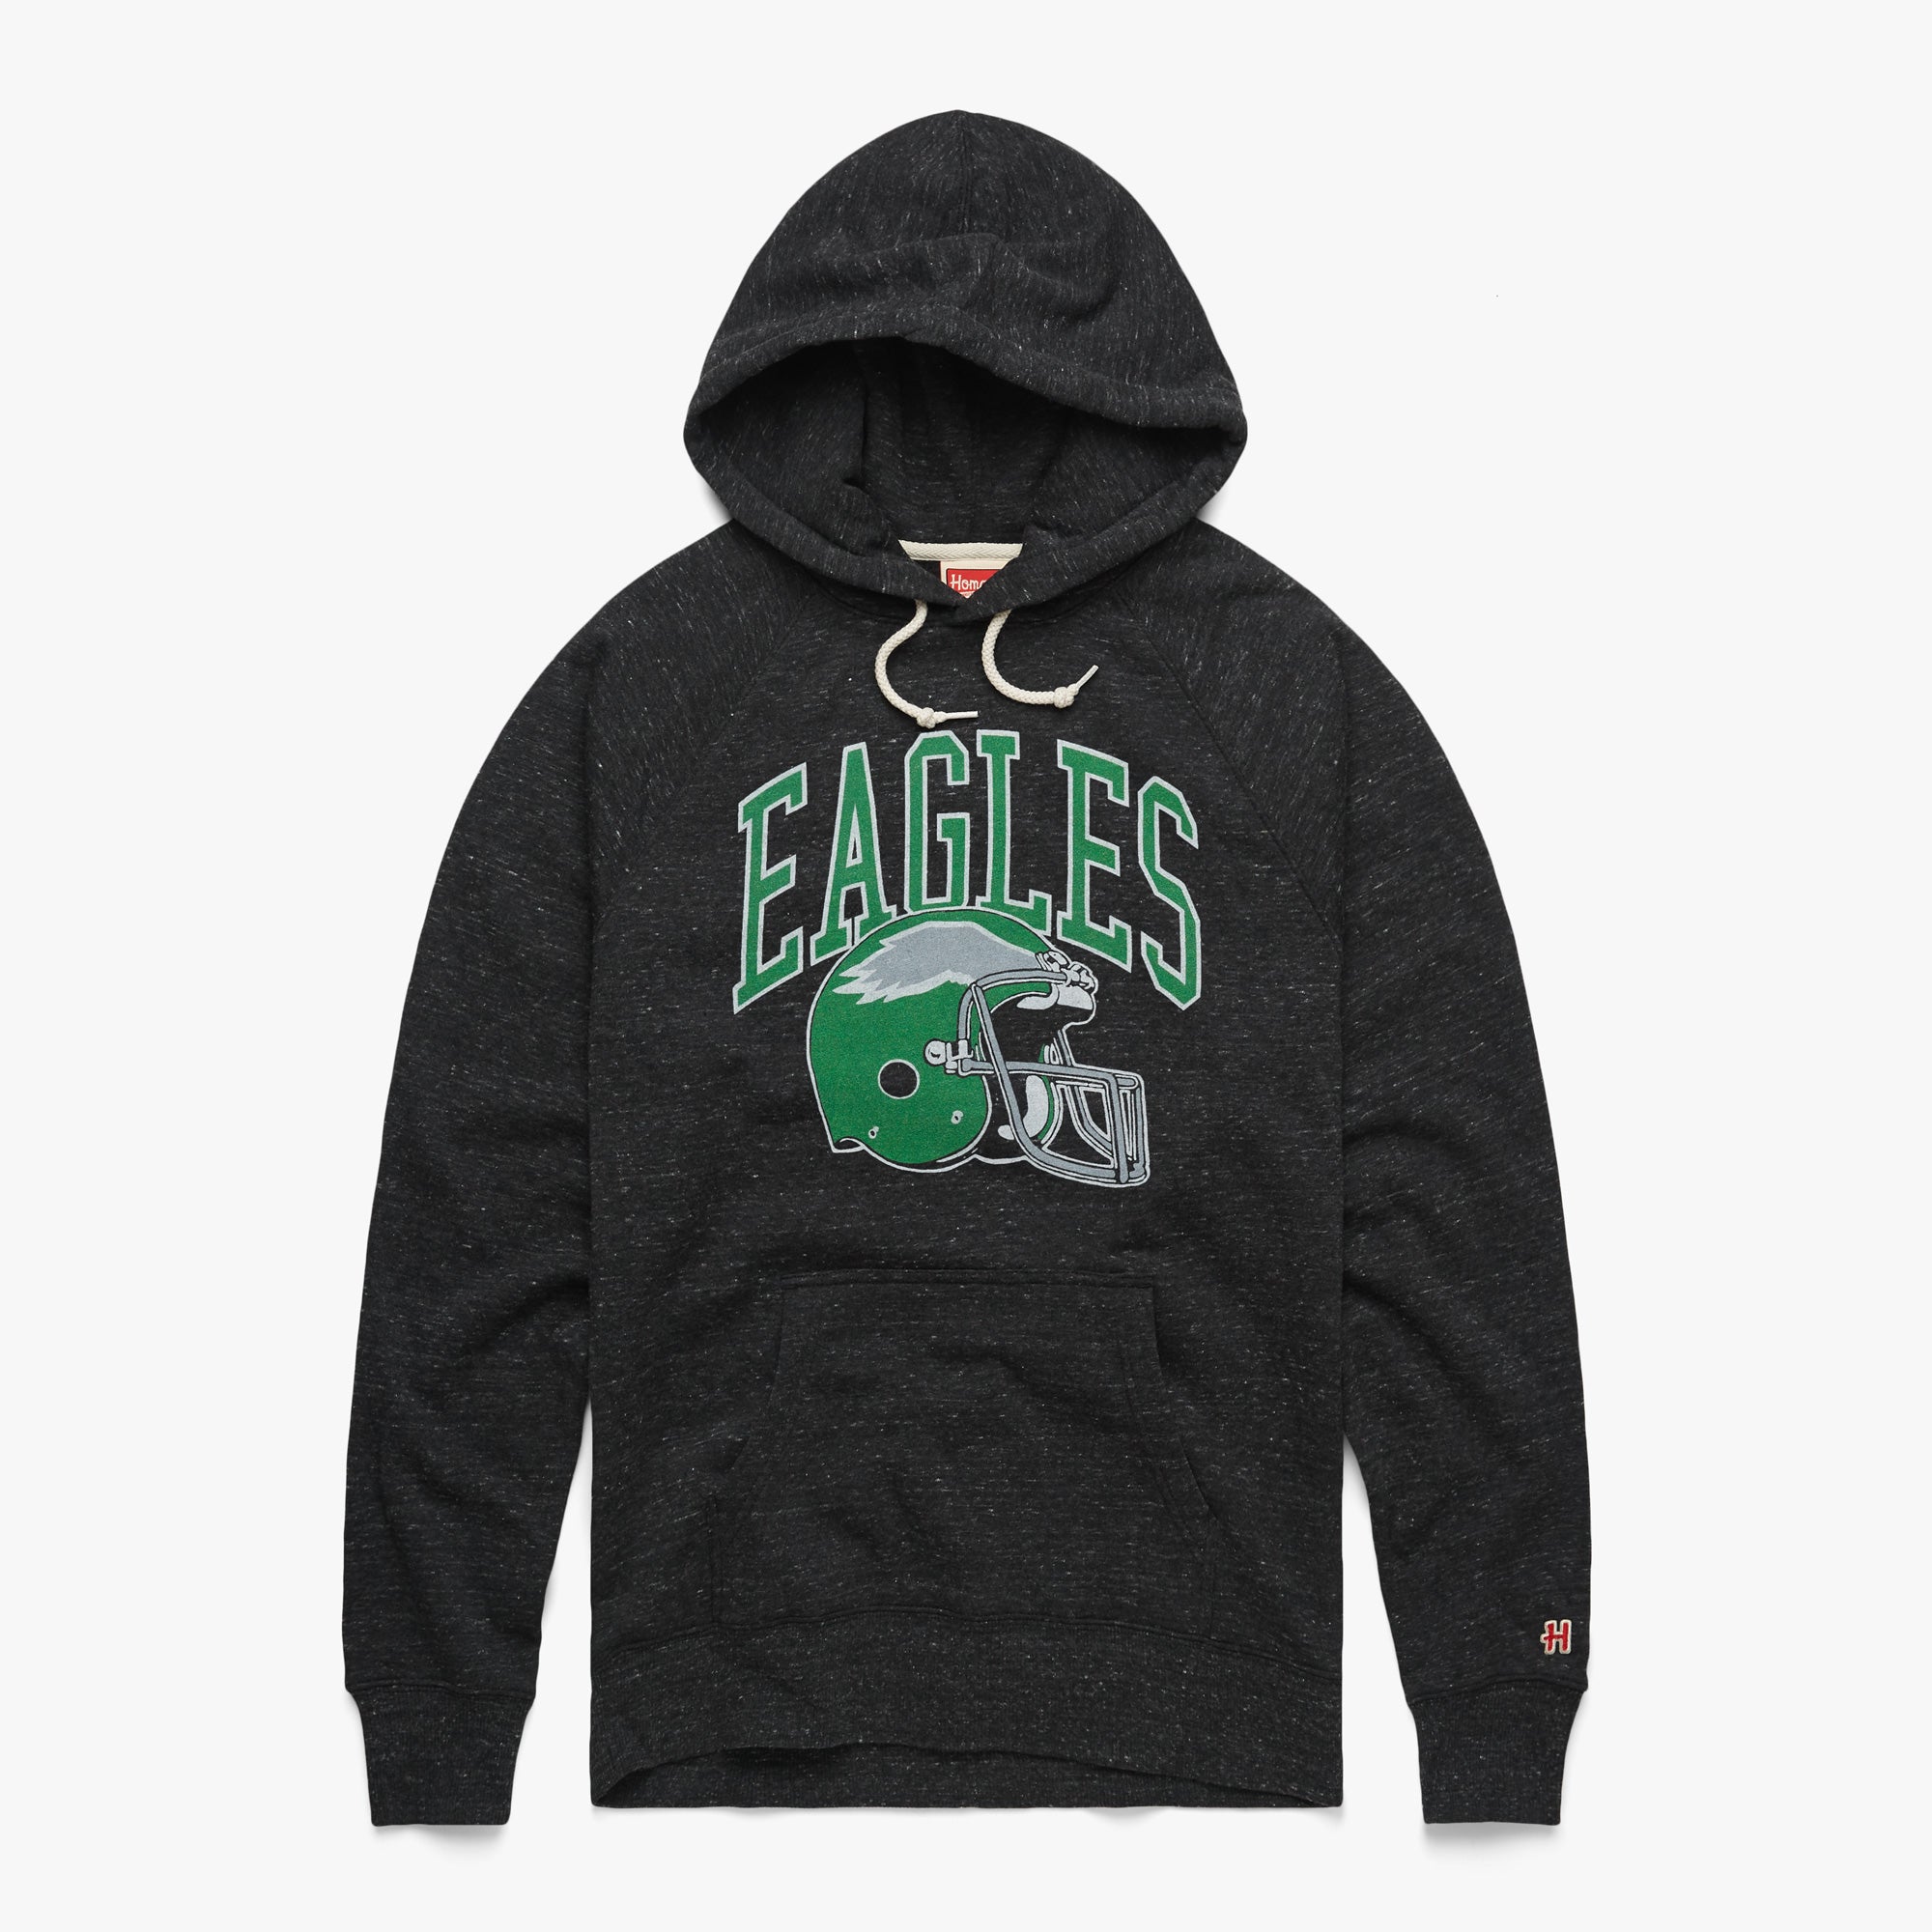 Philadelphia Eagles Helmet Retro Hoodie | Kelly Green Eagles Apparel from Homage. | Officially Licensed NFL Apparel from Homage Pro Shop.